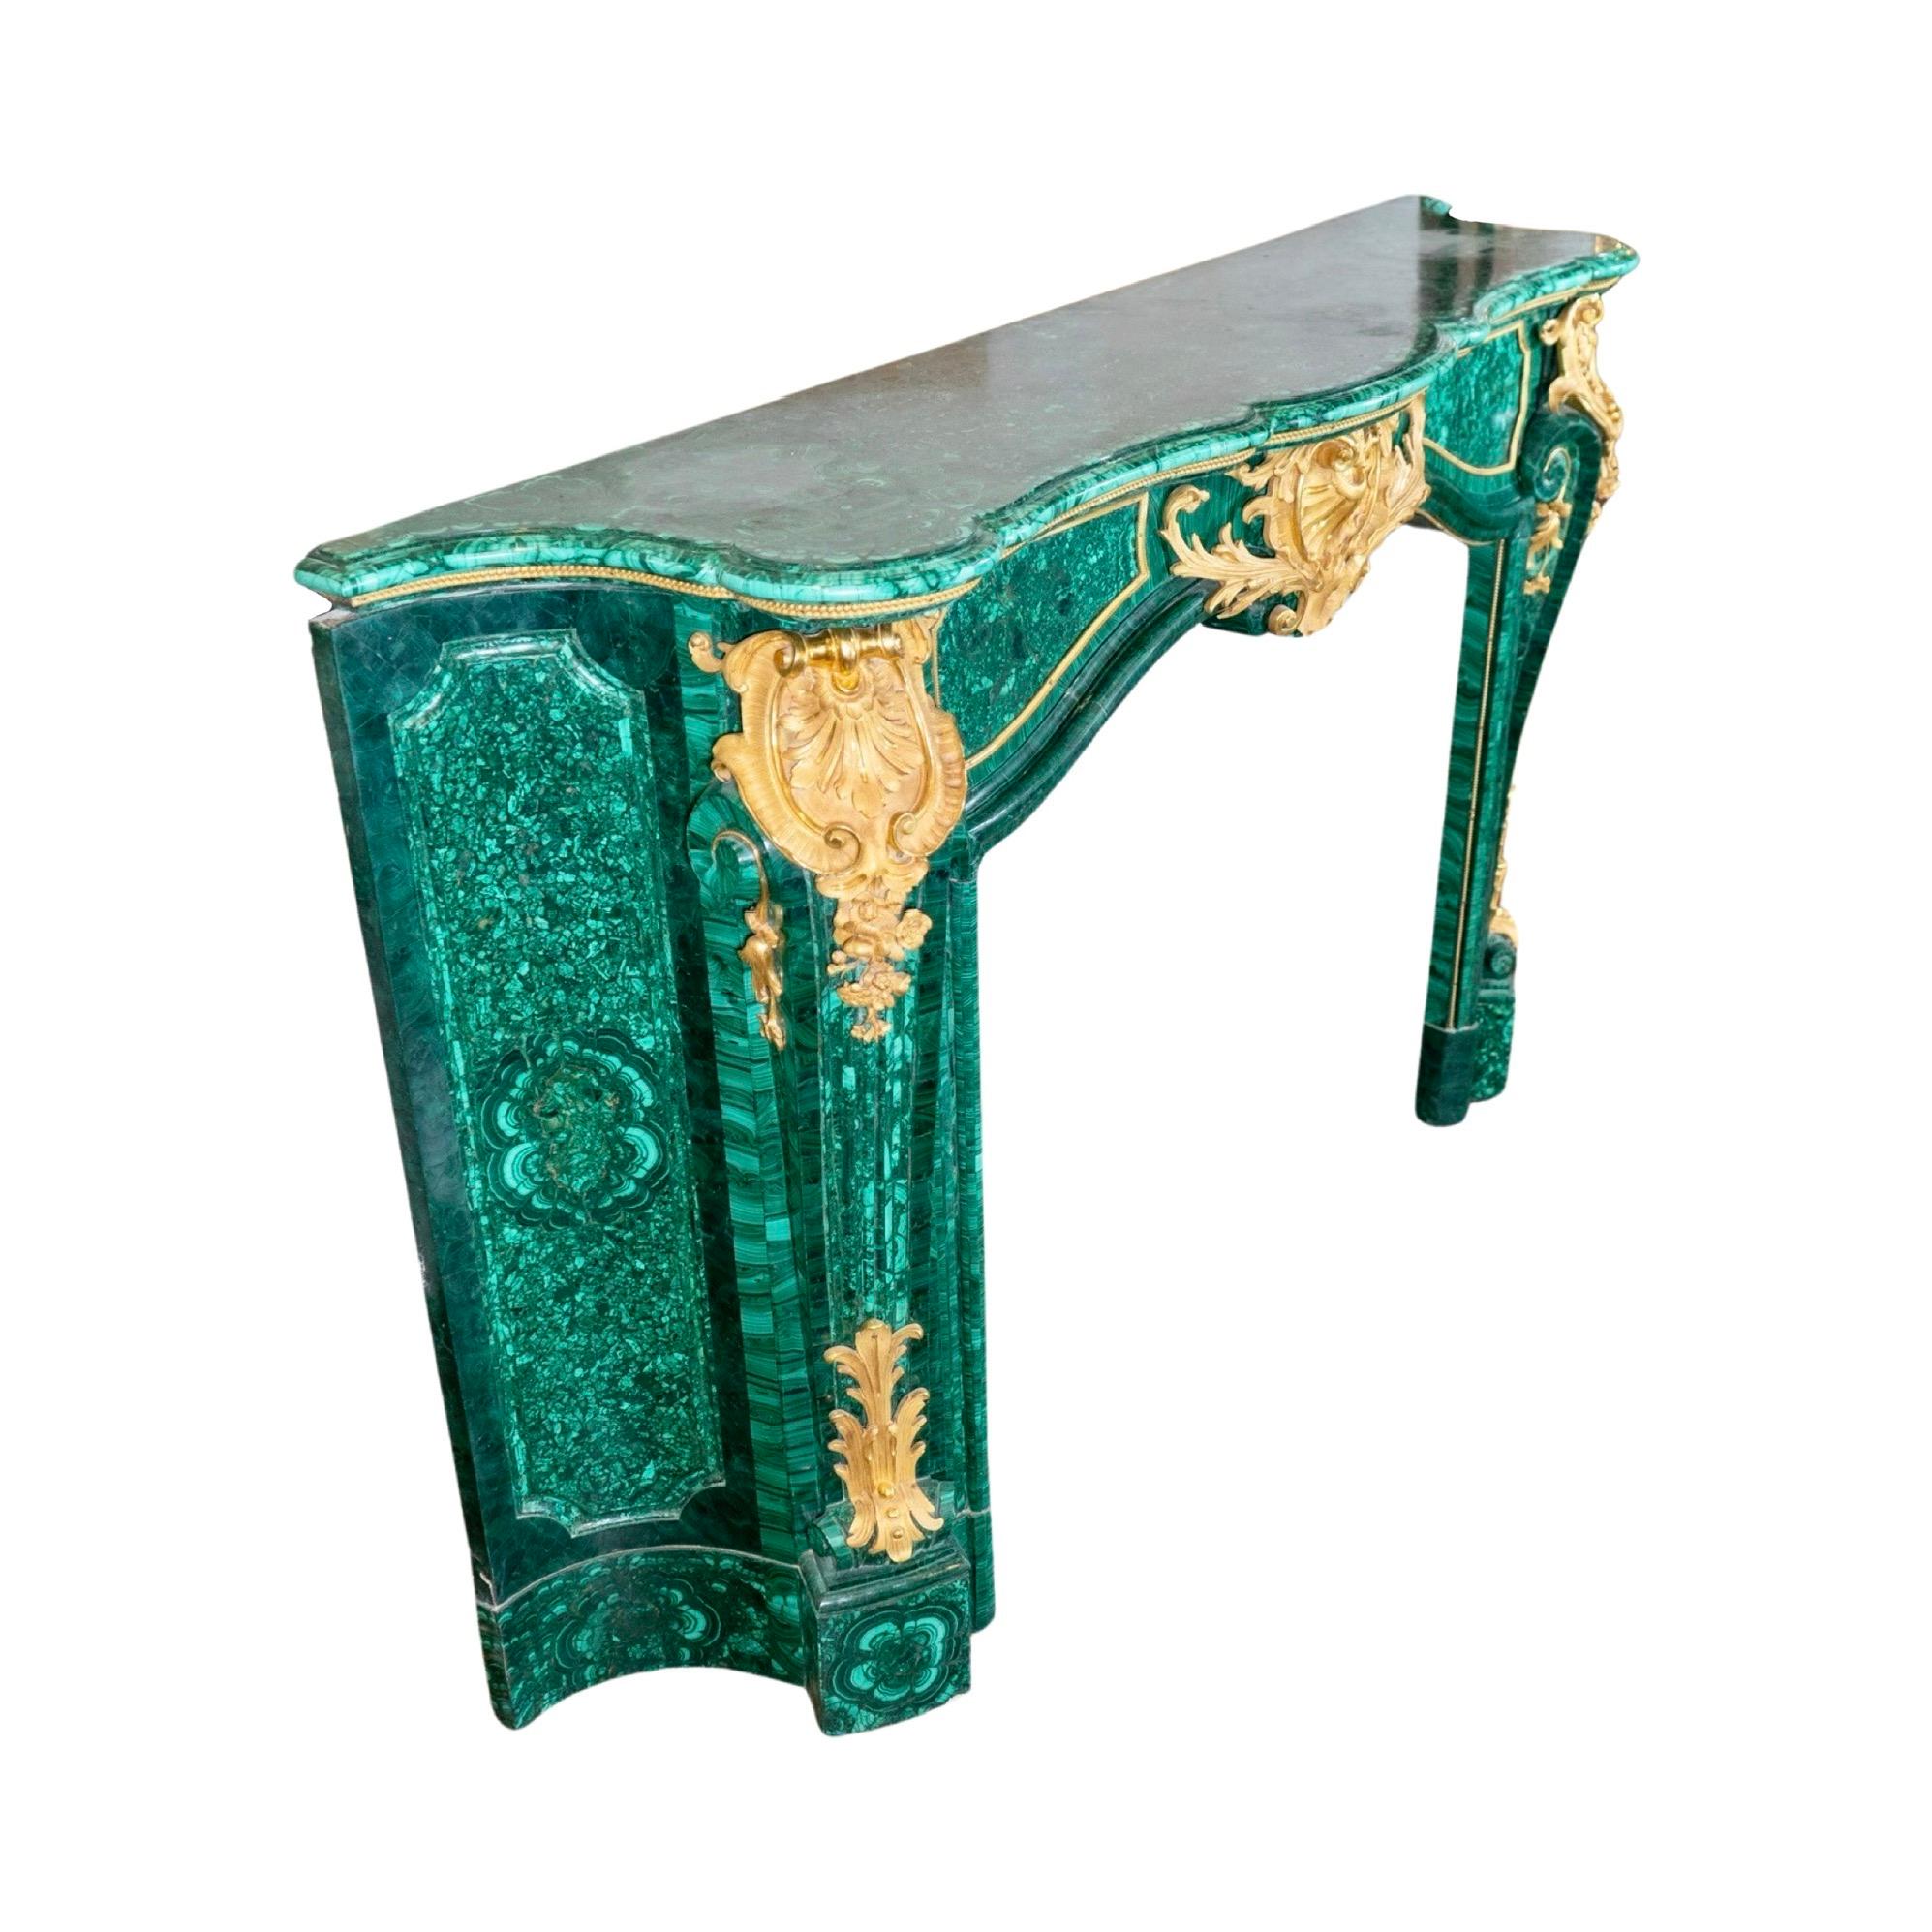 Baroque Louis XIV Style Gilt Bronze and Malachite Fireplace For Sale